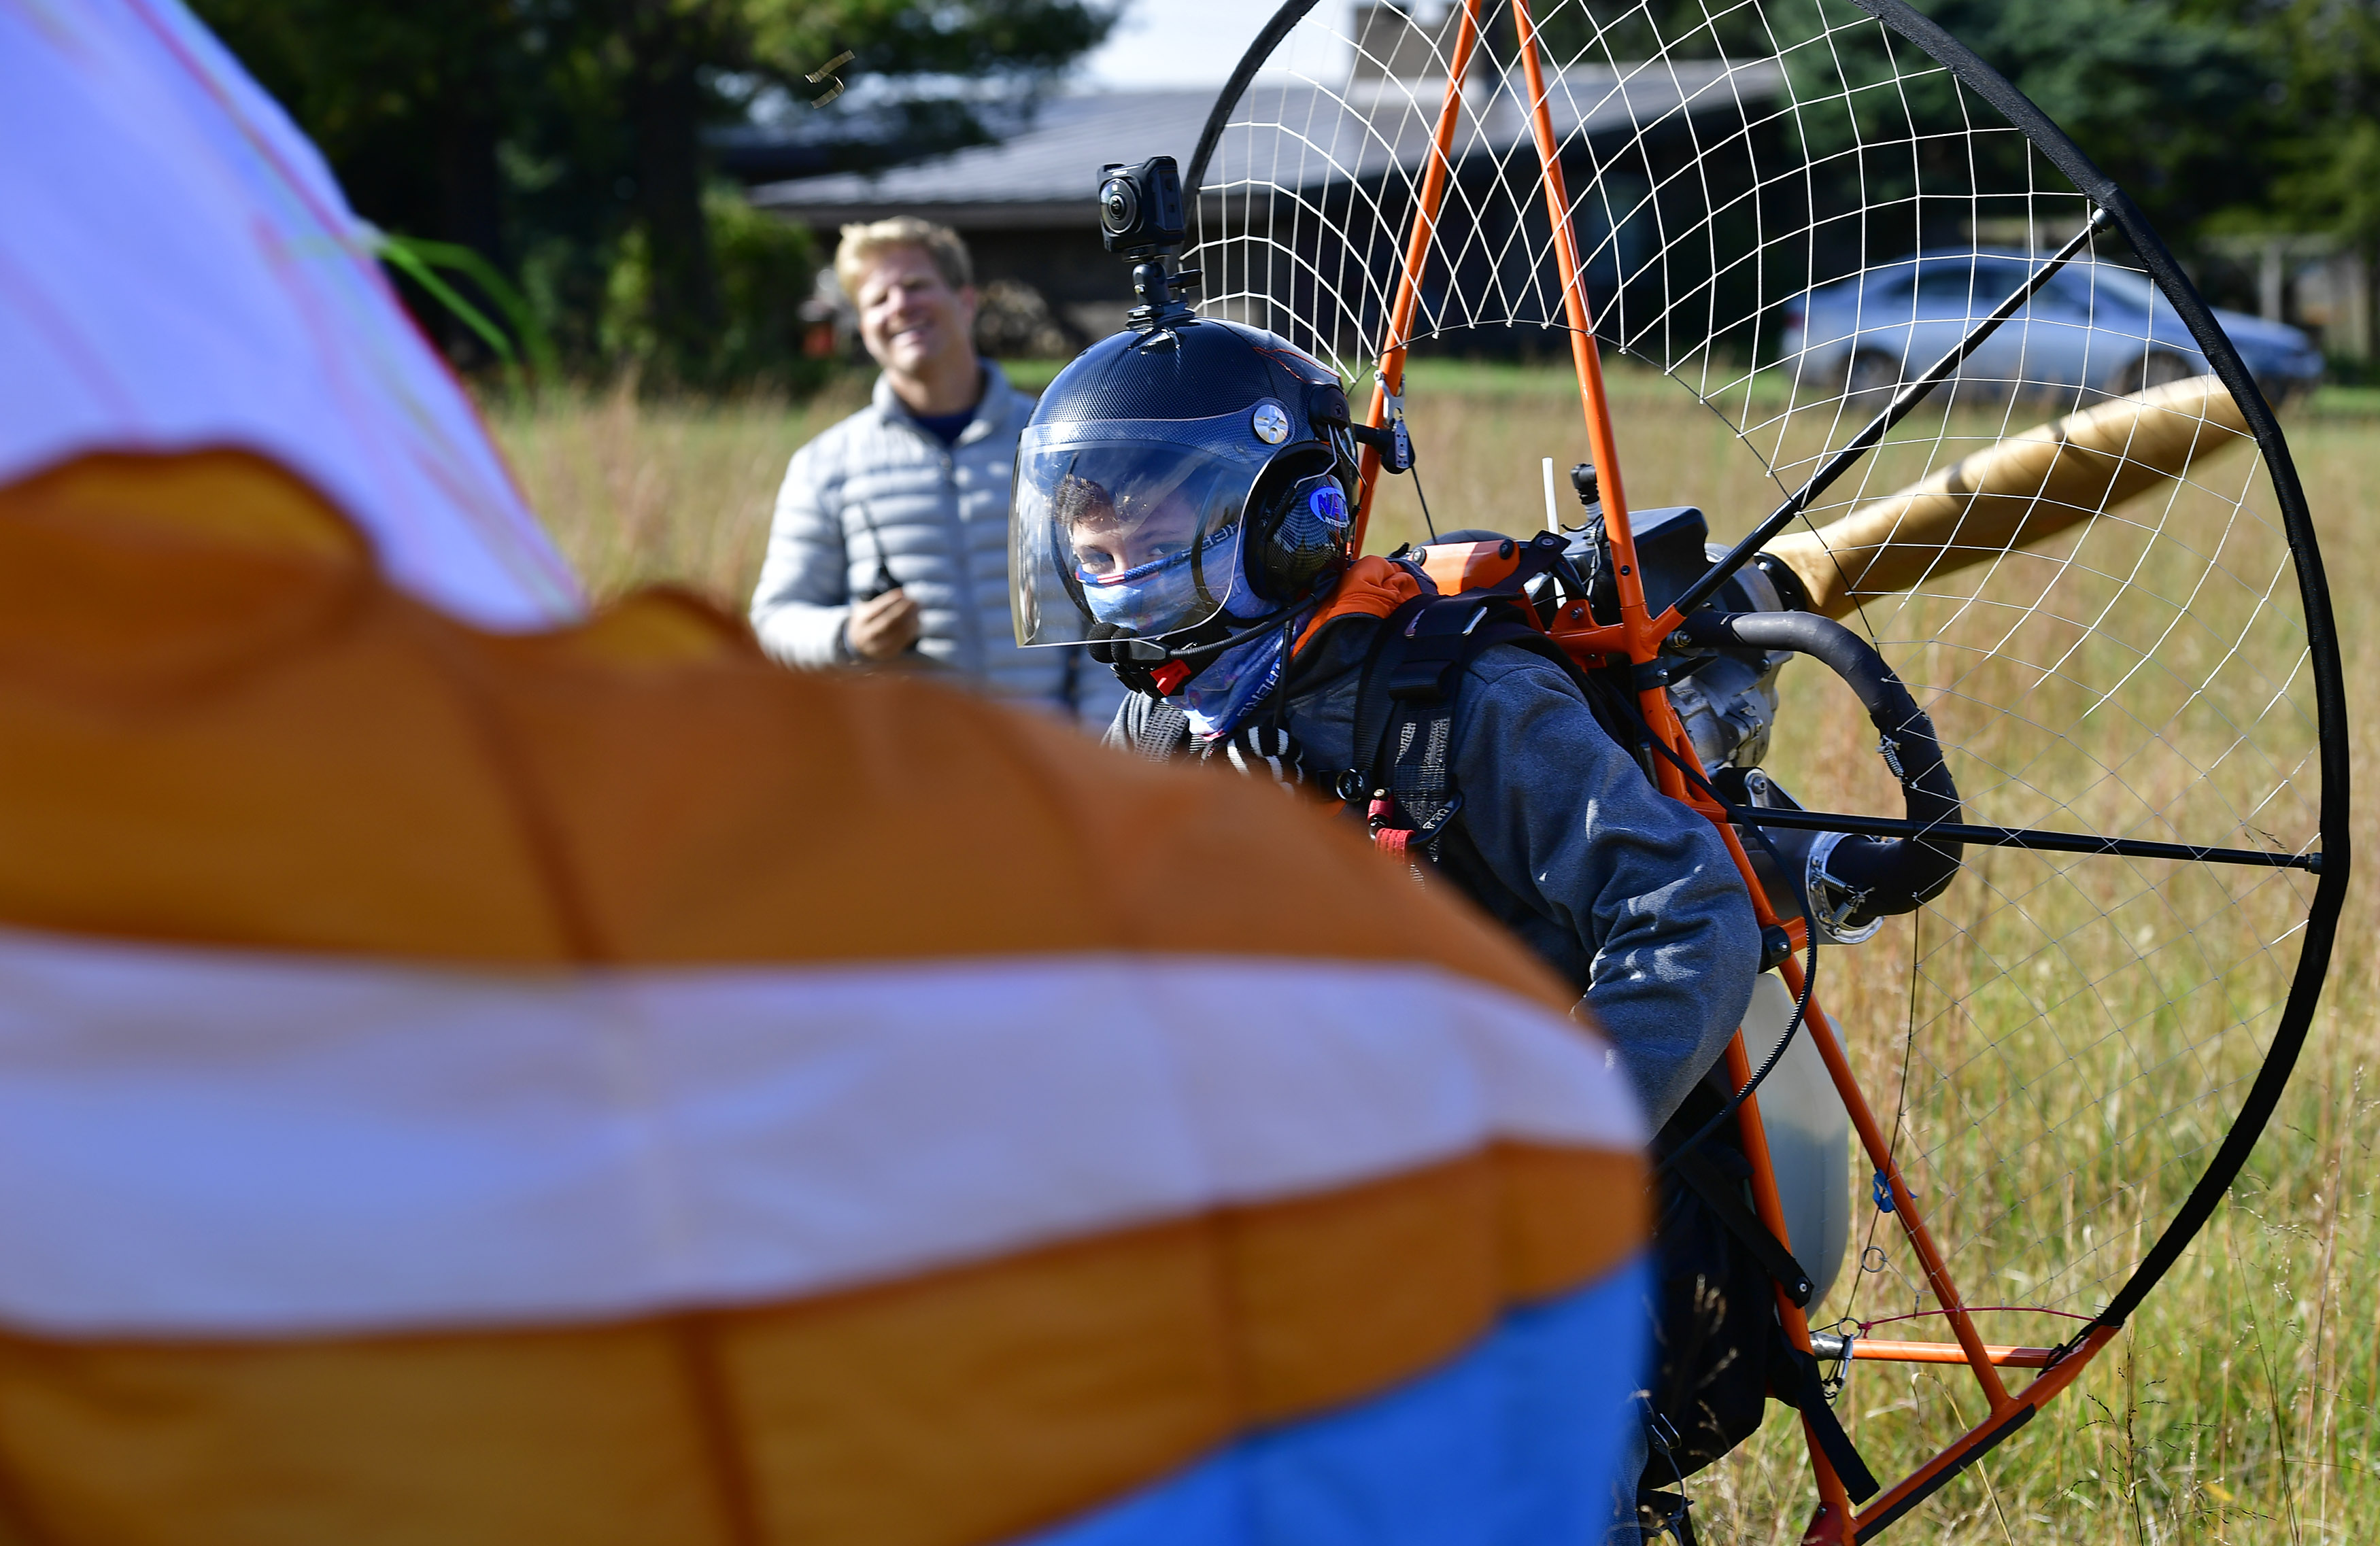 Powered paraglider pilot Henry Scott lands safely under the watchful eyes of his smiling father, Jens. Photo by David Tulis.